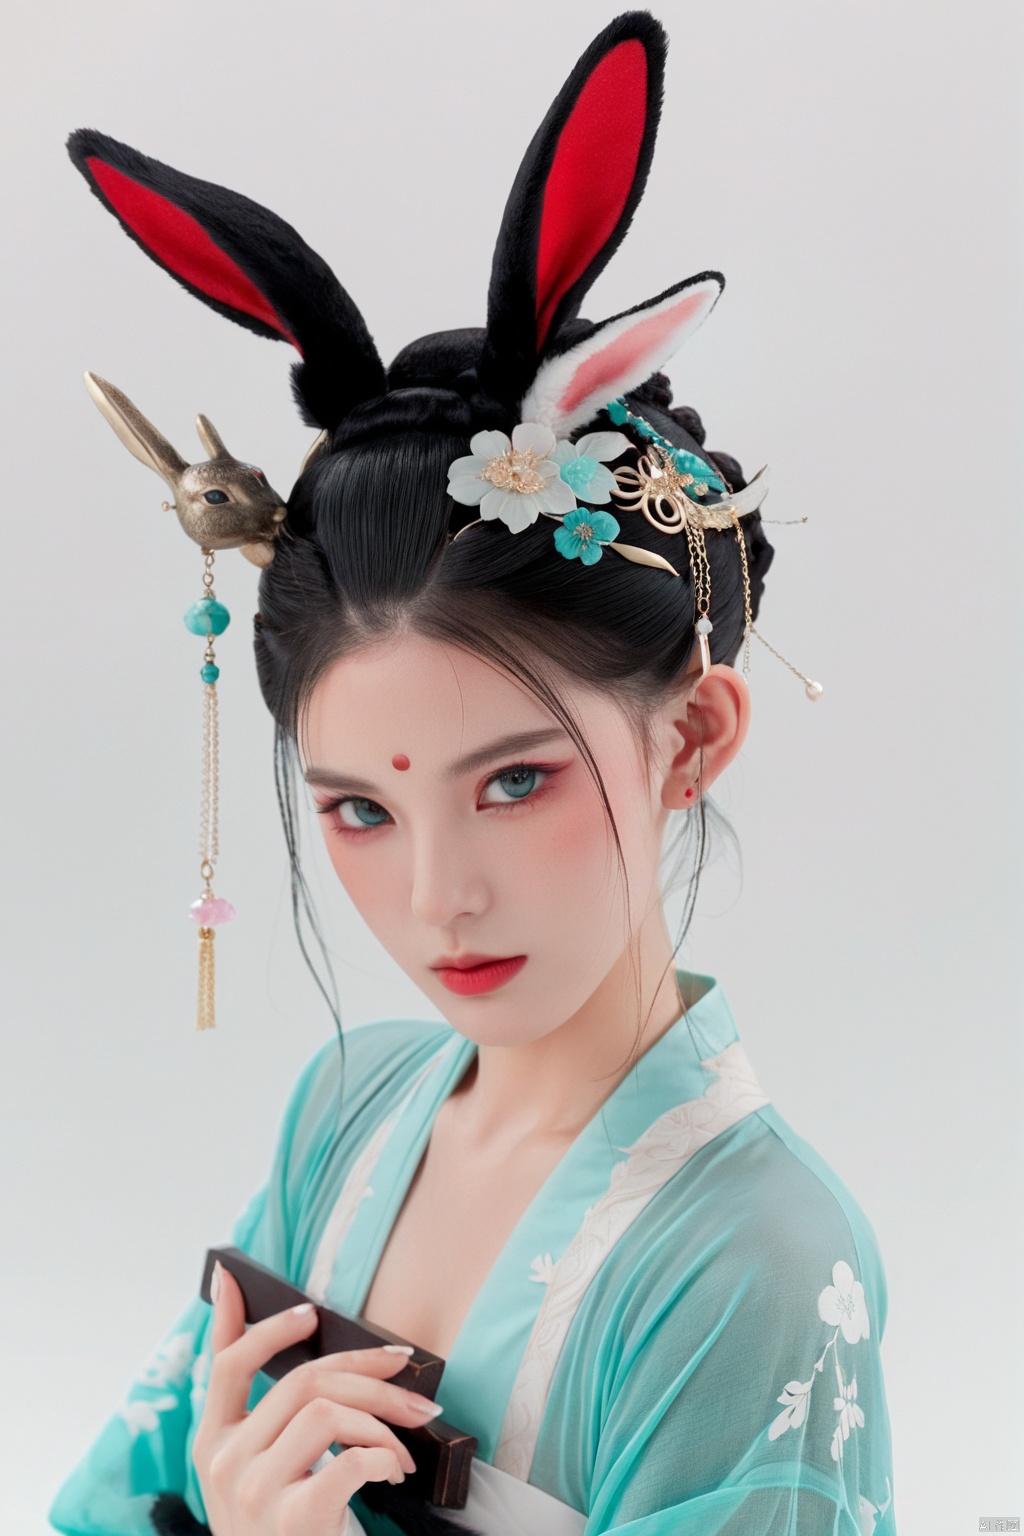  Illustration, digital art, anime style, hubggirl, red eyes, black hair, hair bun with accessories, traditional East Asian attire, rabbit ears headpiece, black and teal clothing, cloud pattern on garment, mystical, two black rabbits, one on shoulder and one in foreground, pale skin, blush on cheeks, serious expression, white background, portrait, upper body shot, artful composition, detailed line art, vibrant color contrast., HUBG_Beauty_Girl